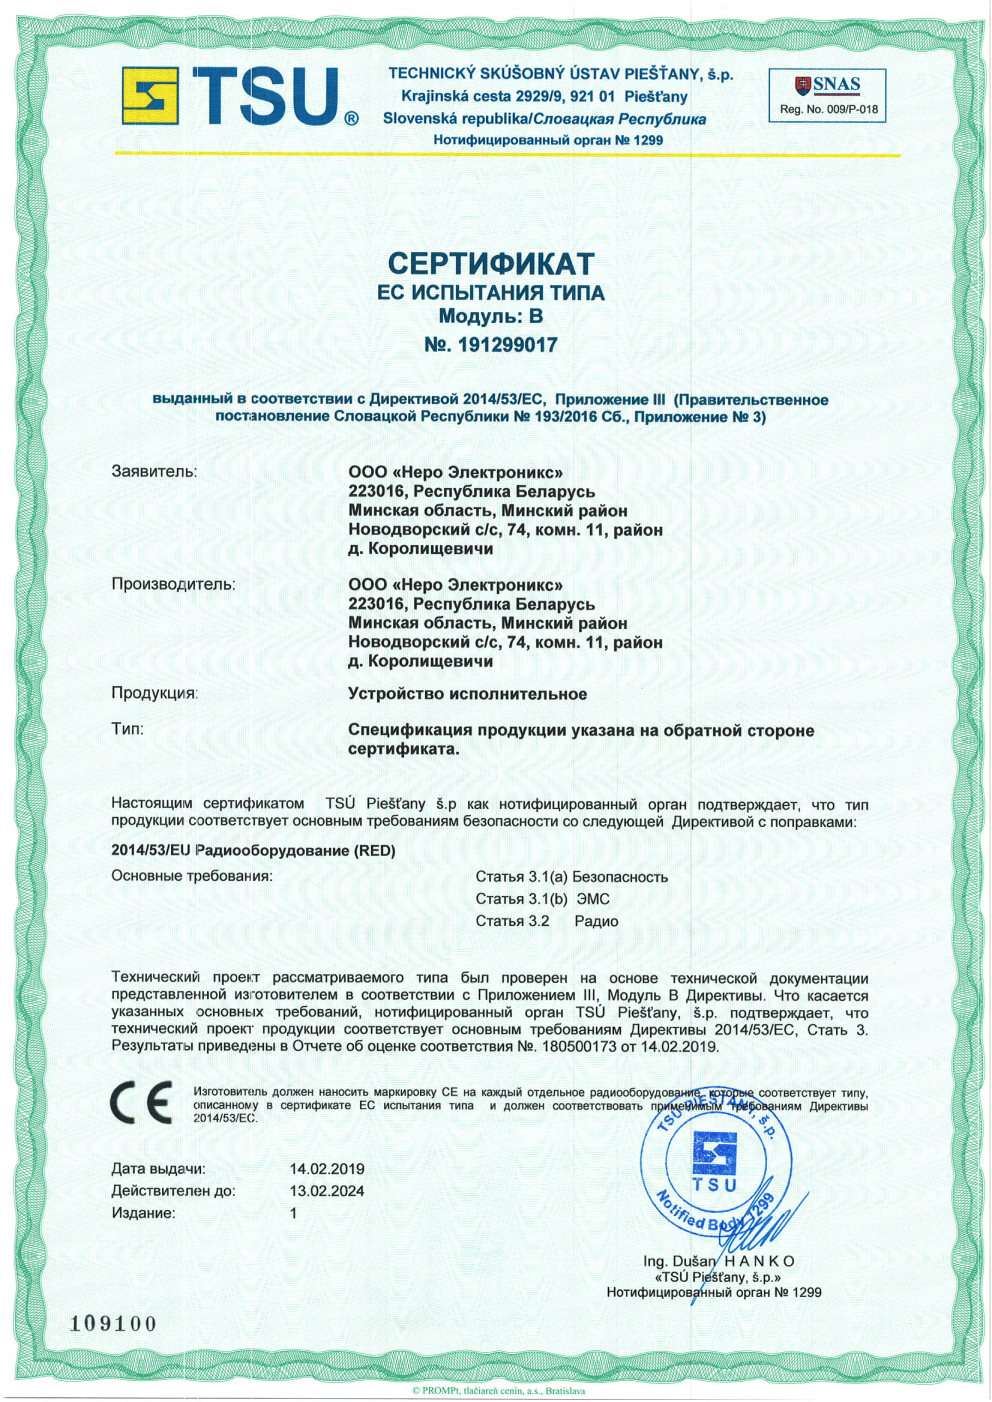 Certificate of compliance for Executive Network Devices